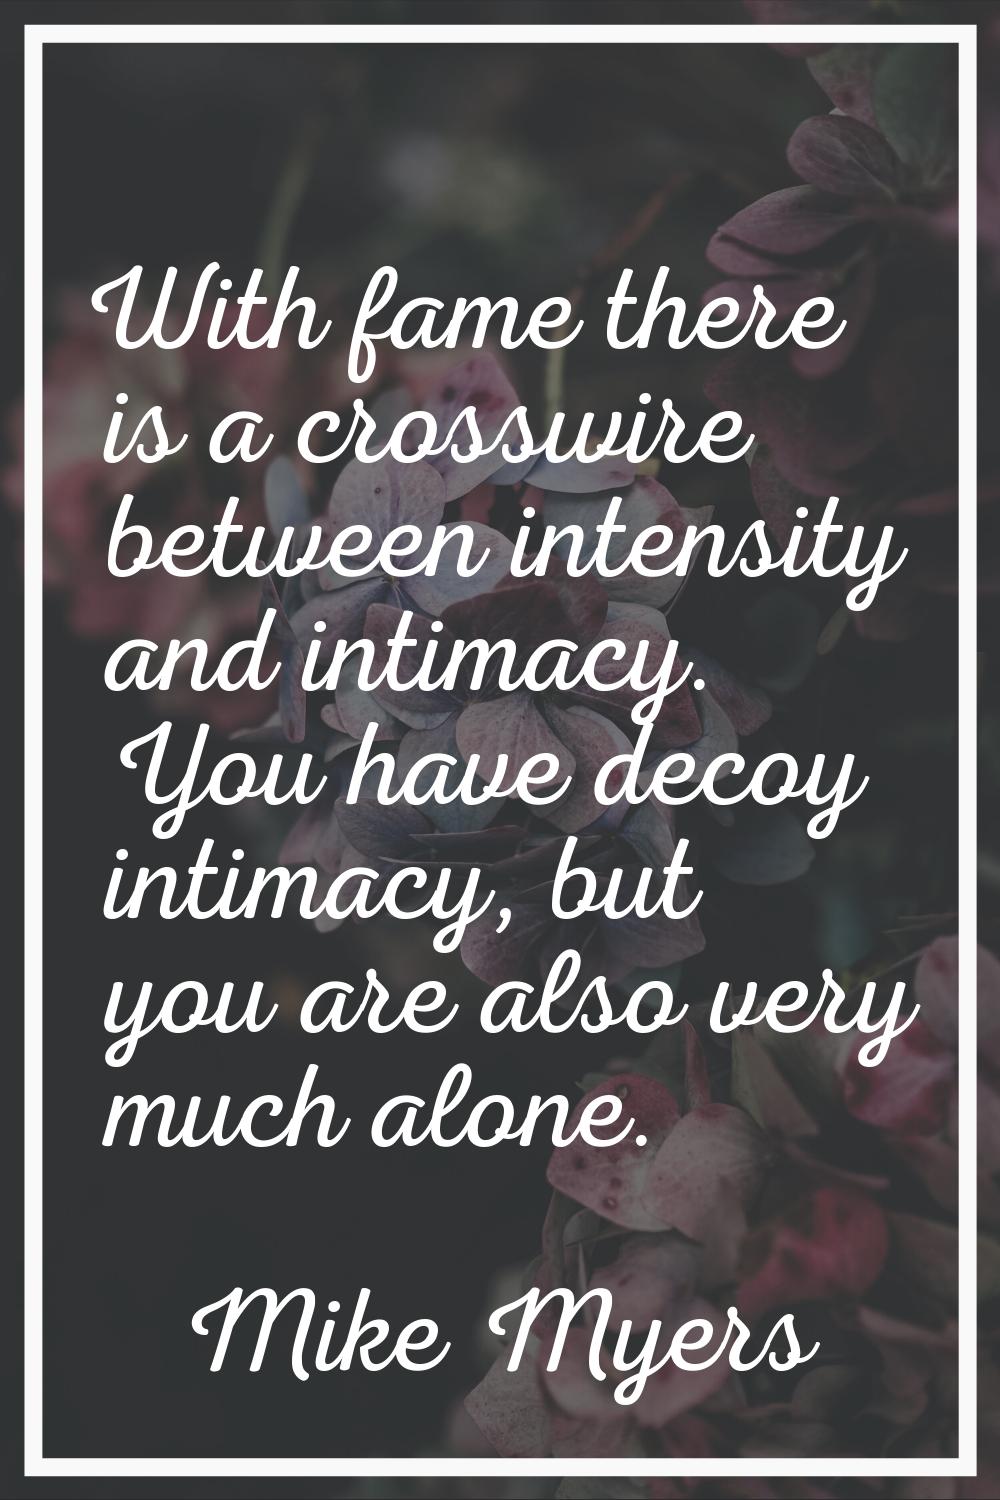 With fame there is a crosswire between intensity and intimacy. You have decoy intimacy, but you are